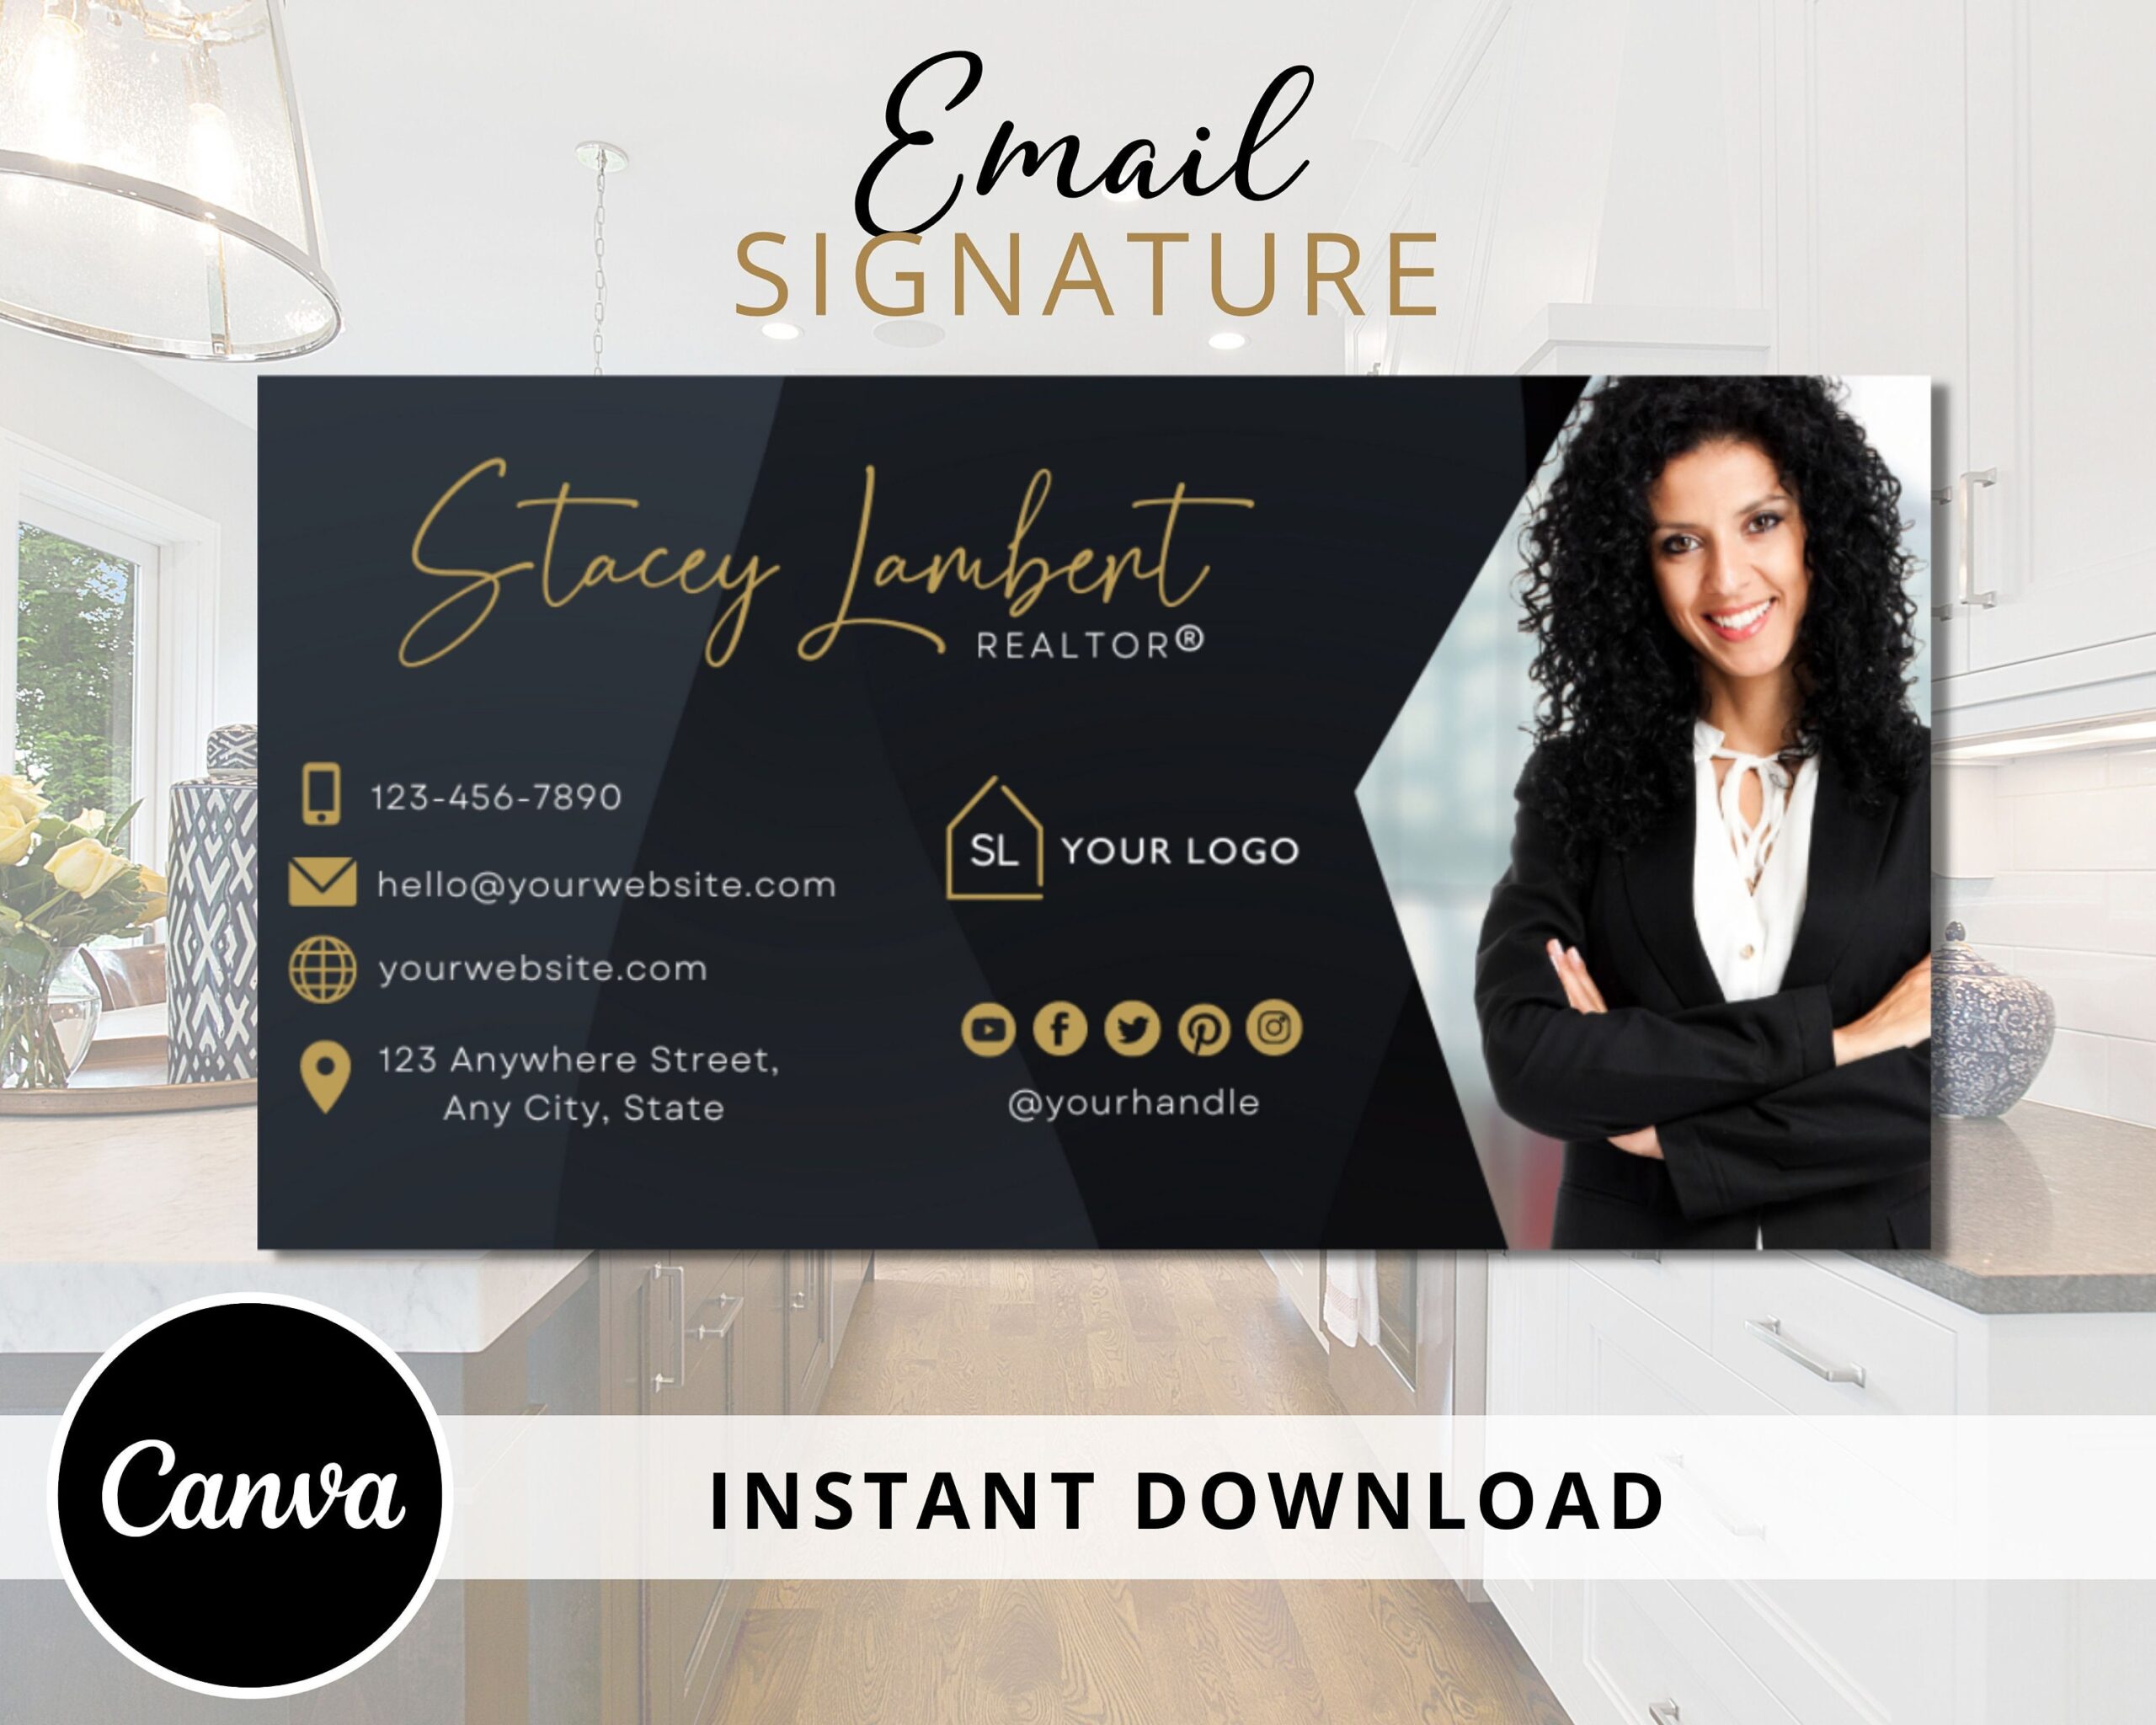 DIY Email Signature Template for Real Estate Agents, Email Footer Design - Fully Editable Canva Template - Instant Download